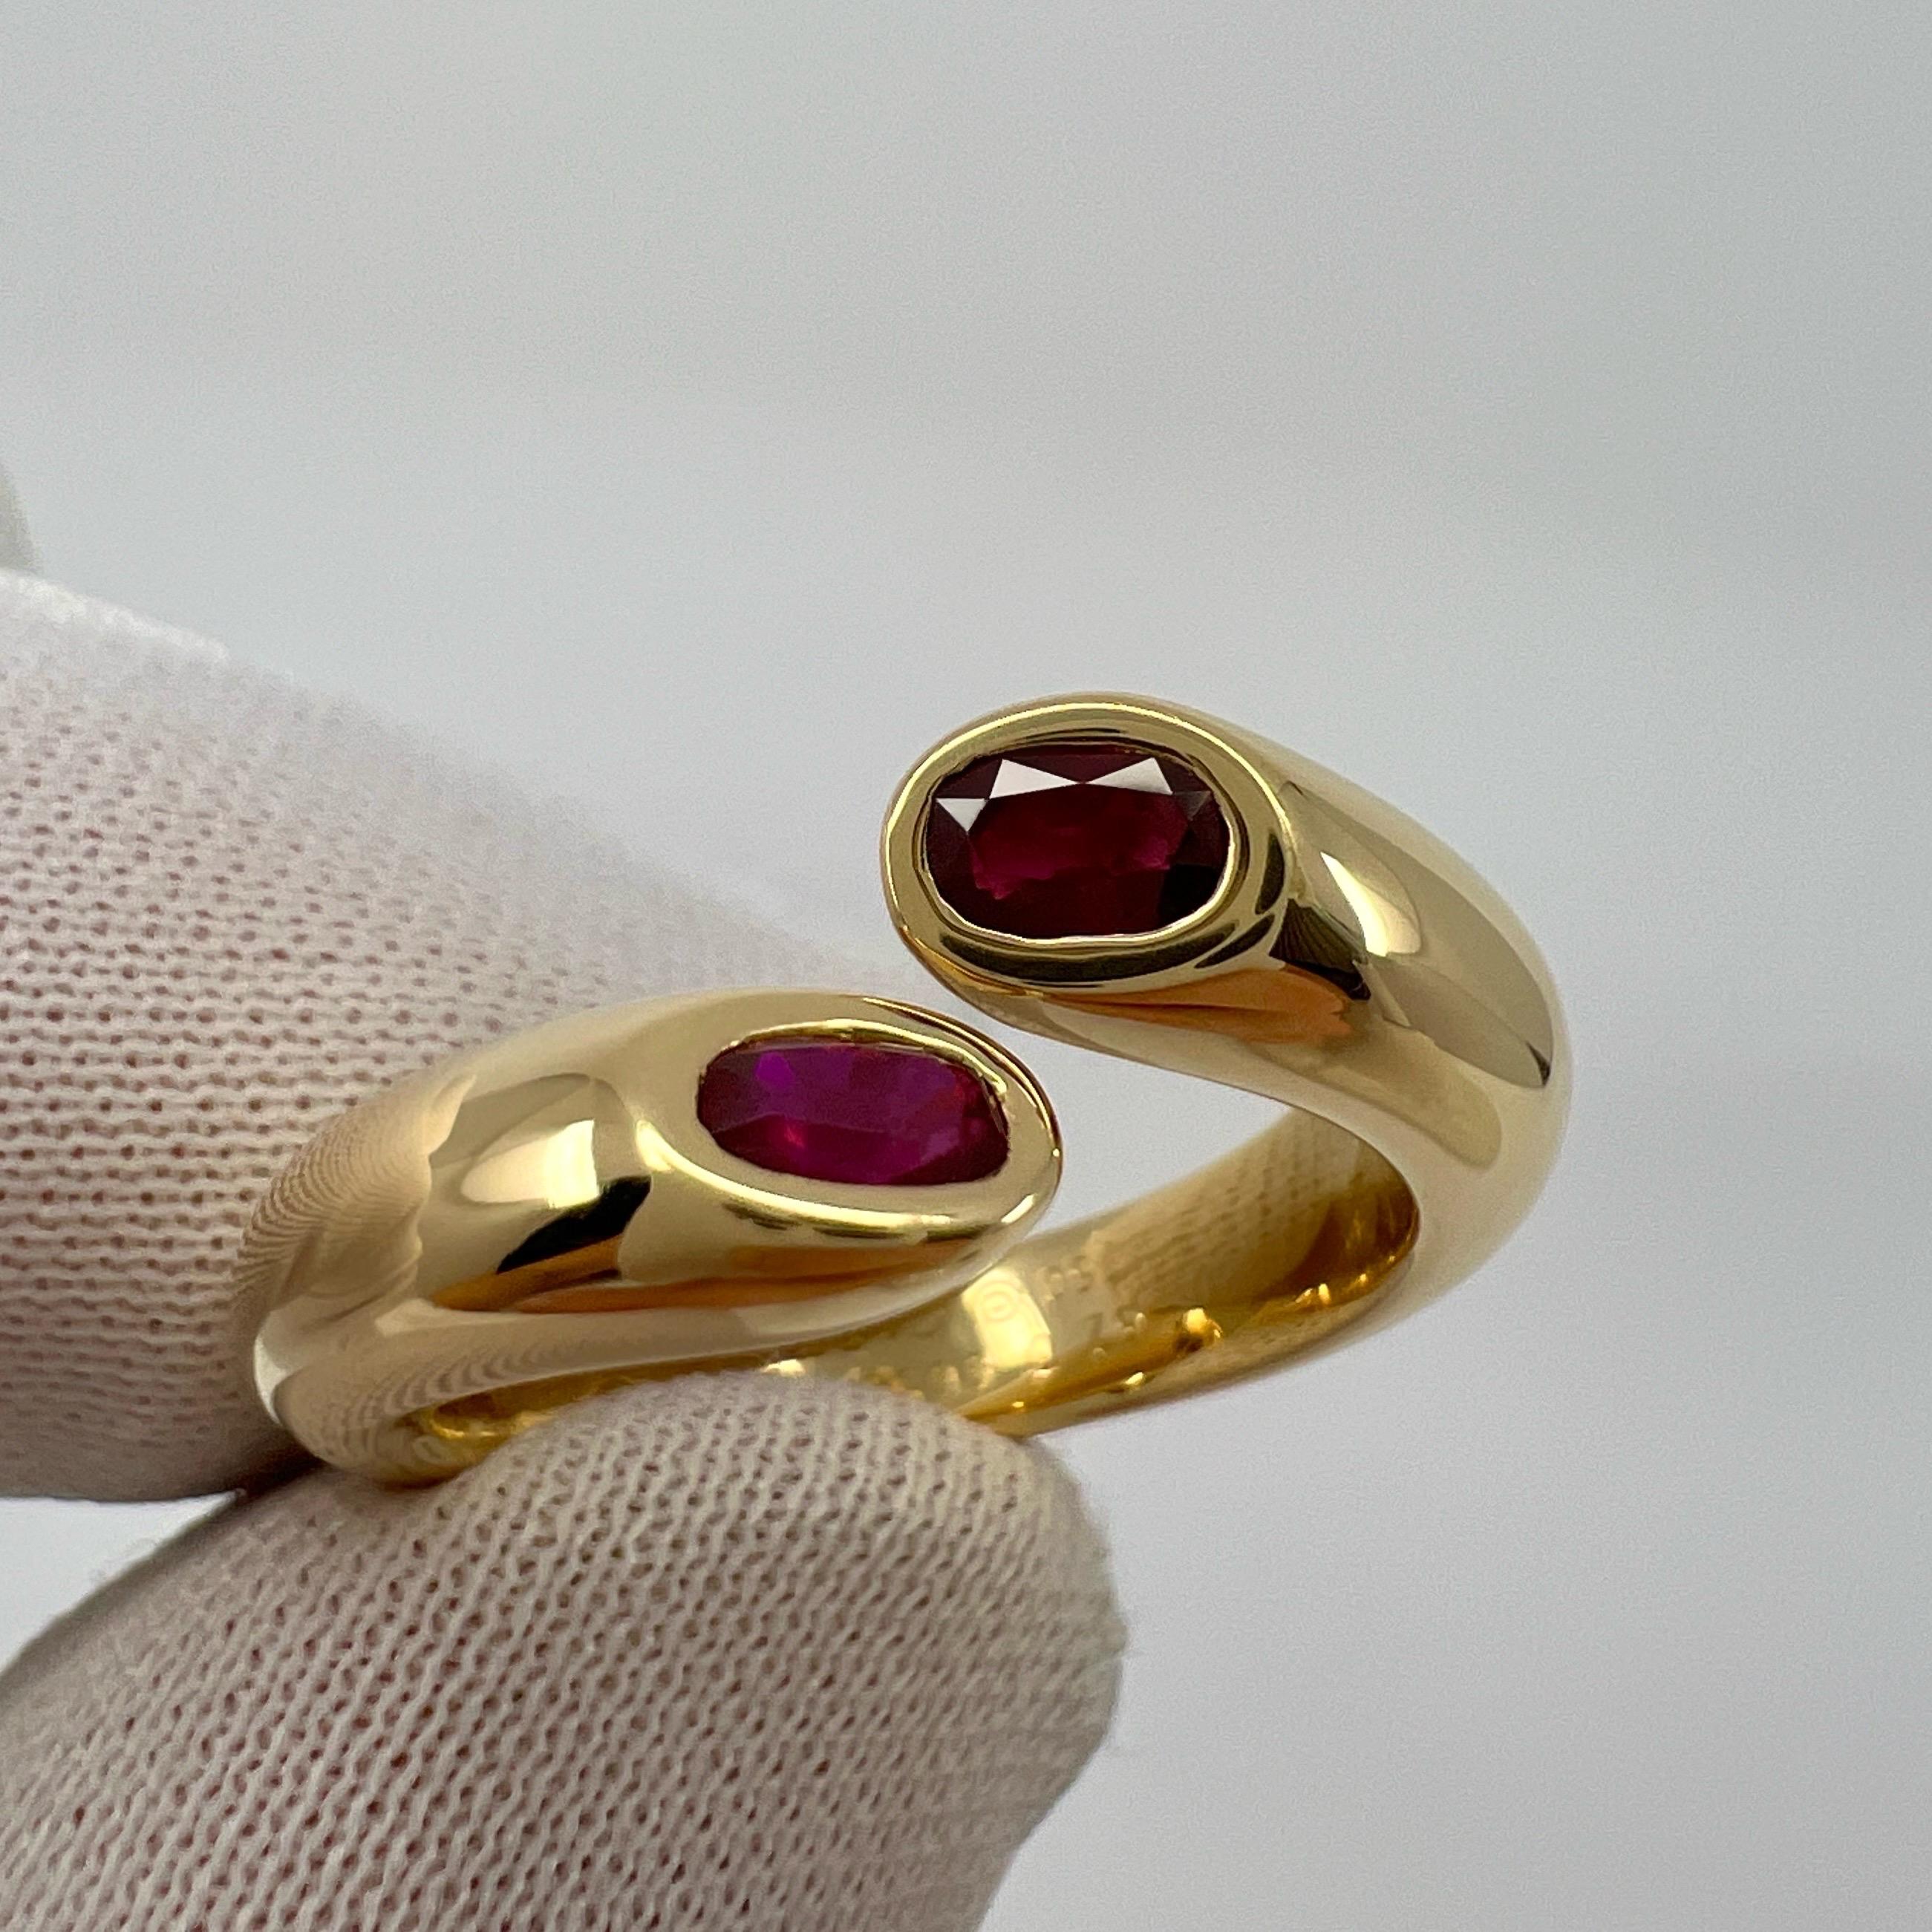 Rare Vintage Cartier Red Ruby Ellipse Oval Cut 18k Gold Bypass Split Ring 6 52 7